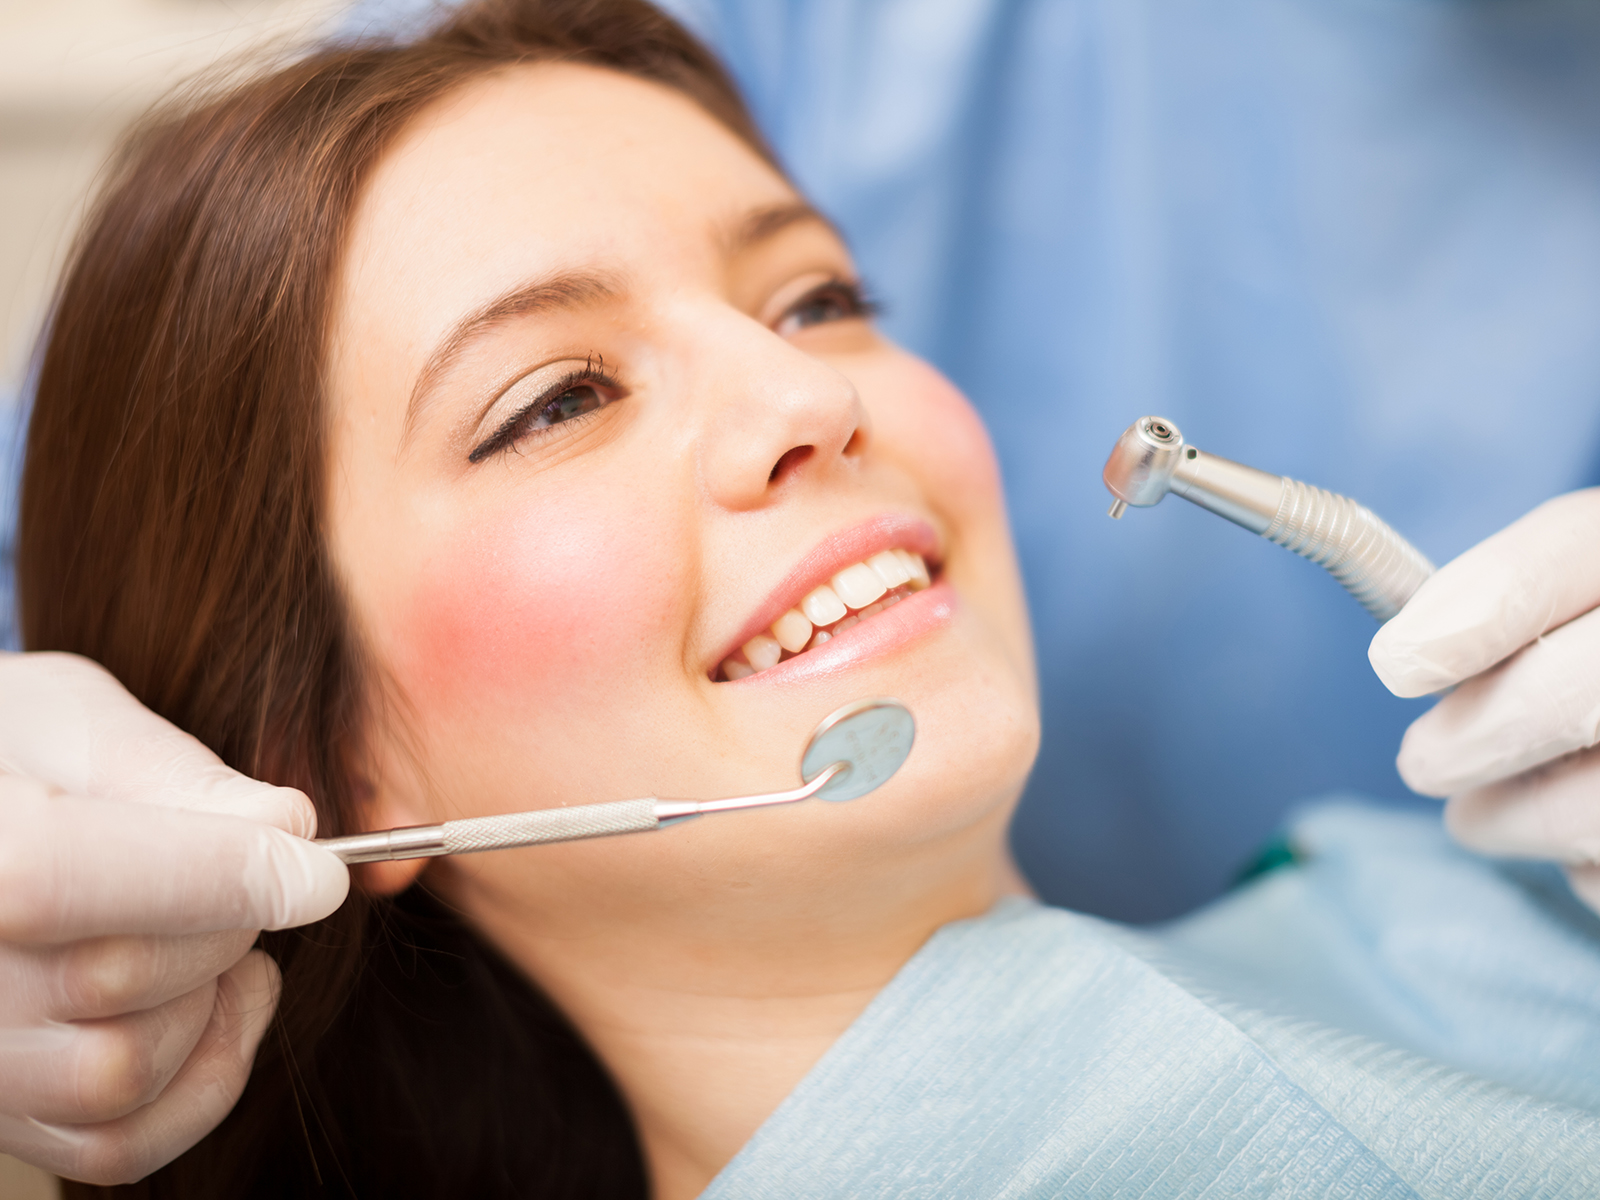 What are the signs of needing a root canal?